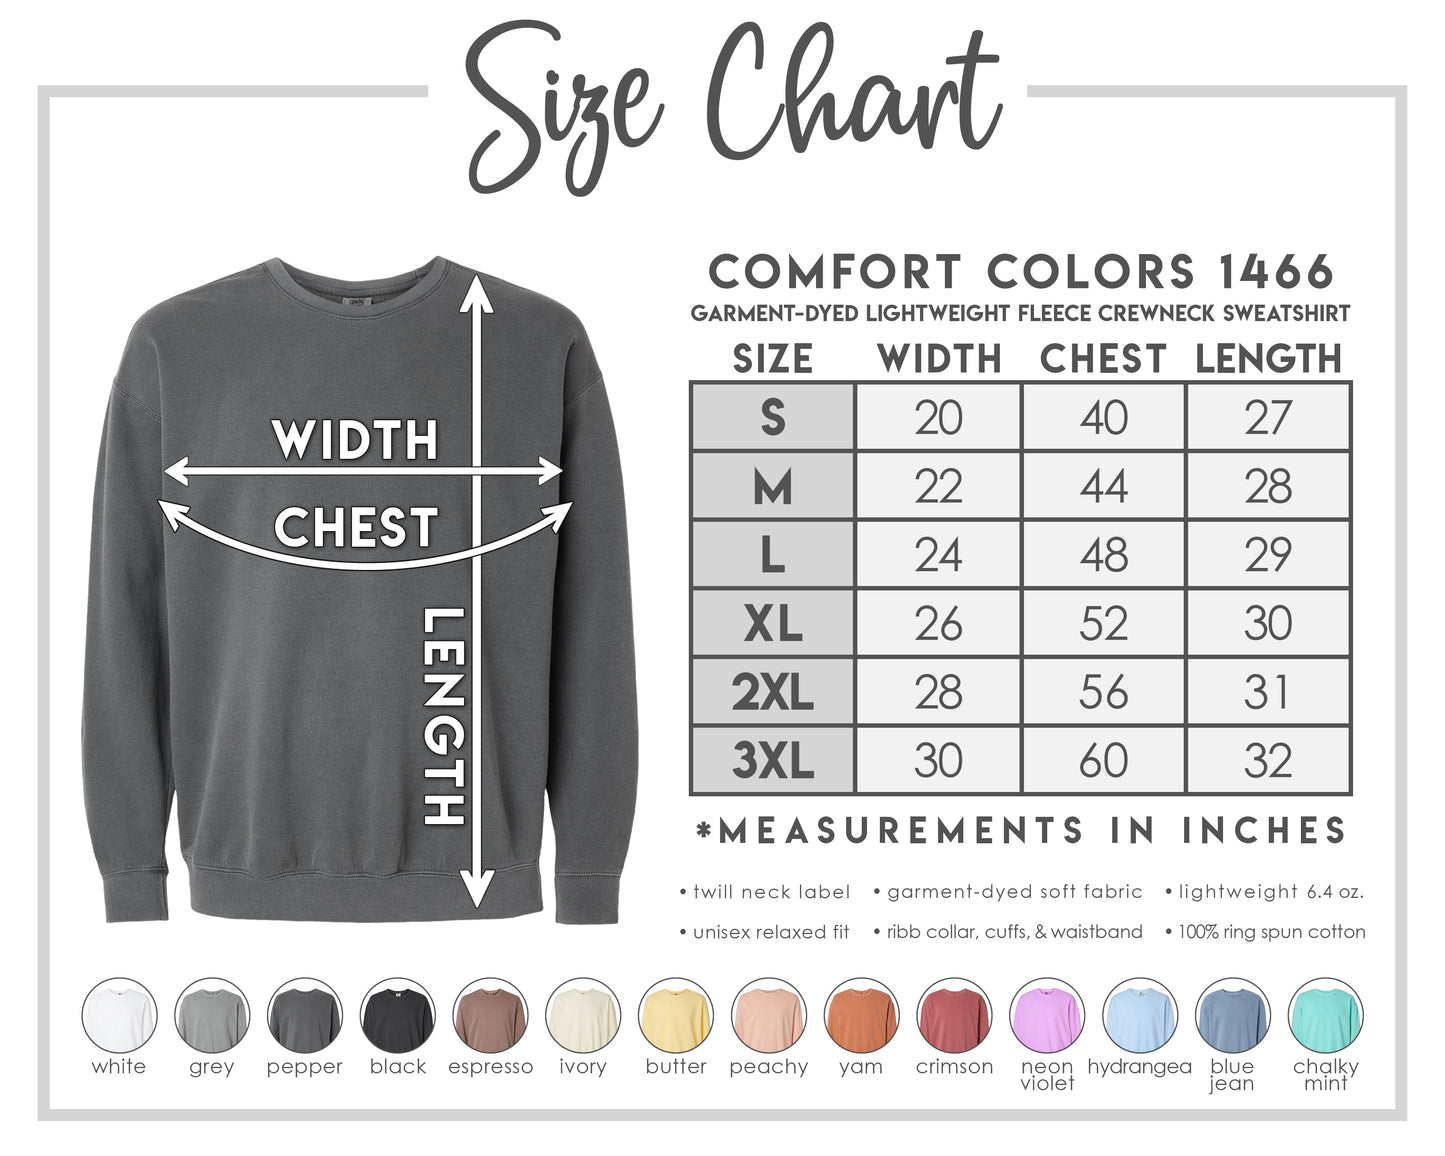 You Win Some, You Lose Some Shirt -- Embroidered, Lightweight Sweatshirt, Comfort Colors